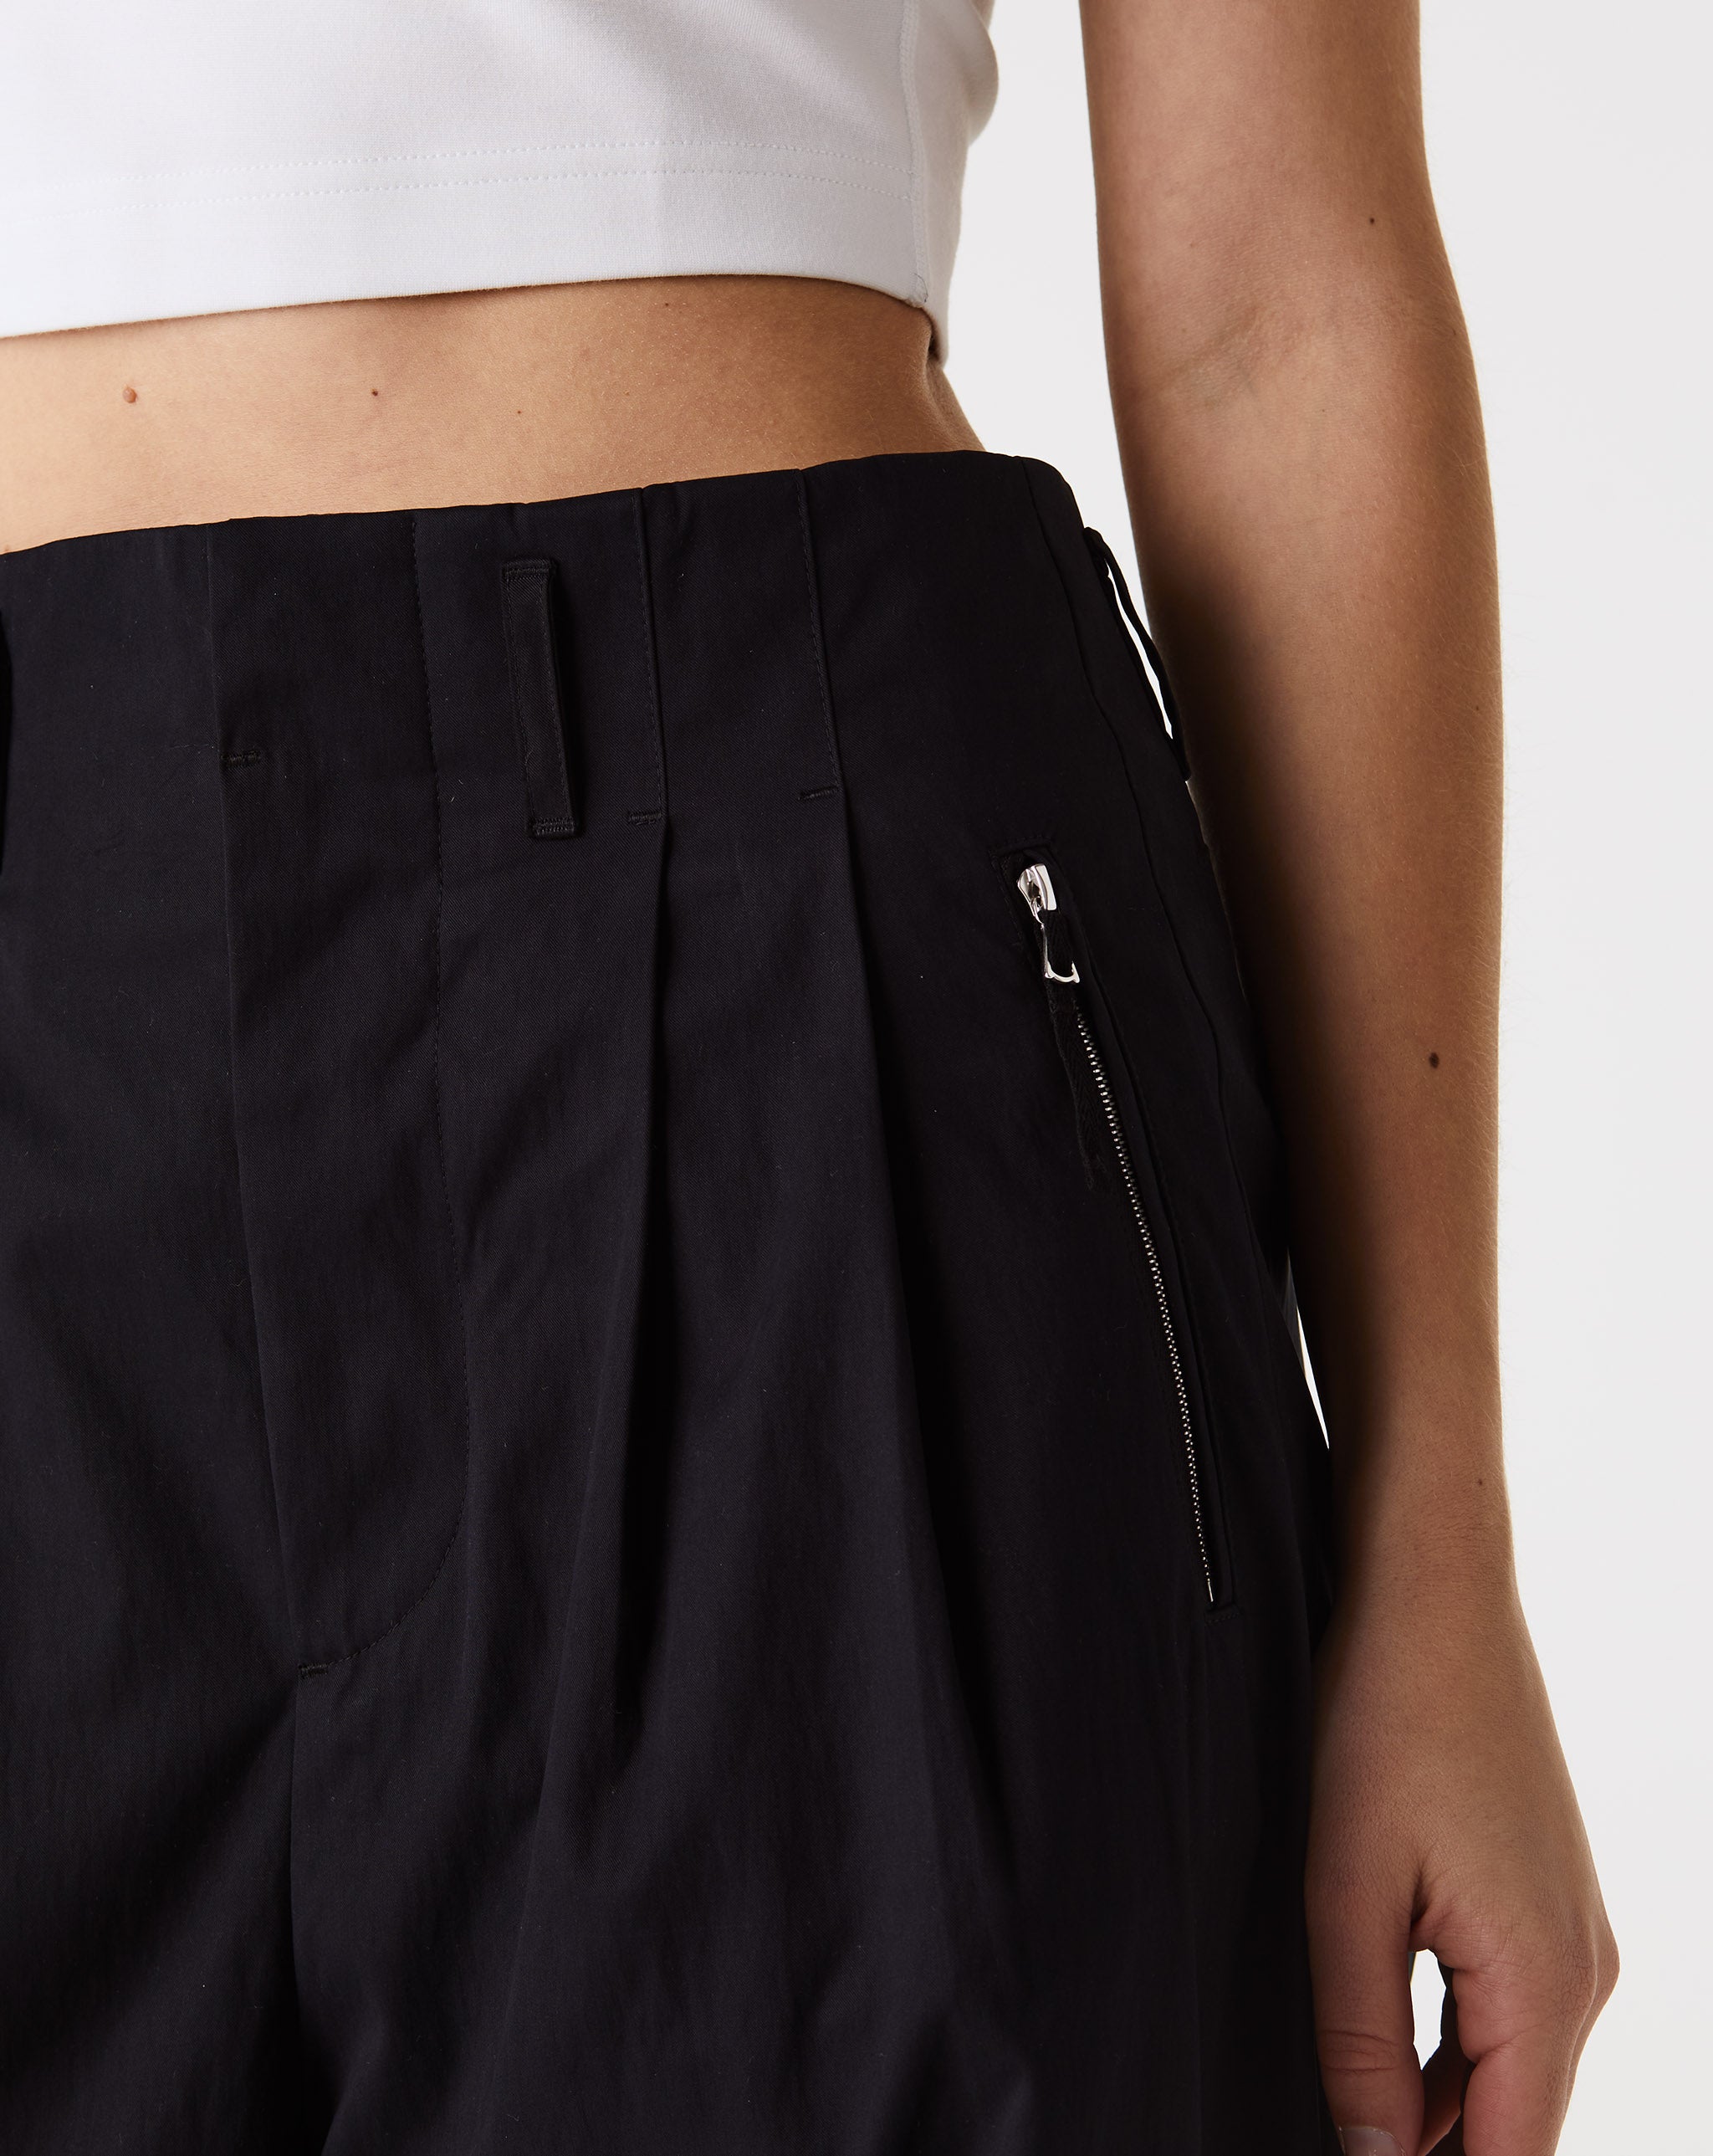 Nike Women's Every Stitch Considered Woven Worker Pants  - XHIBITION